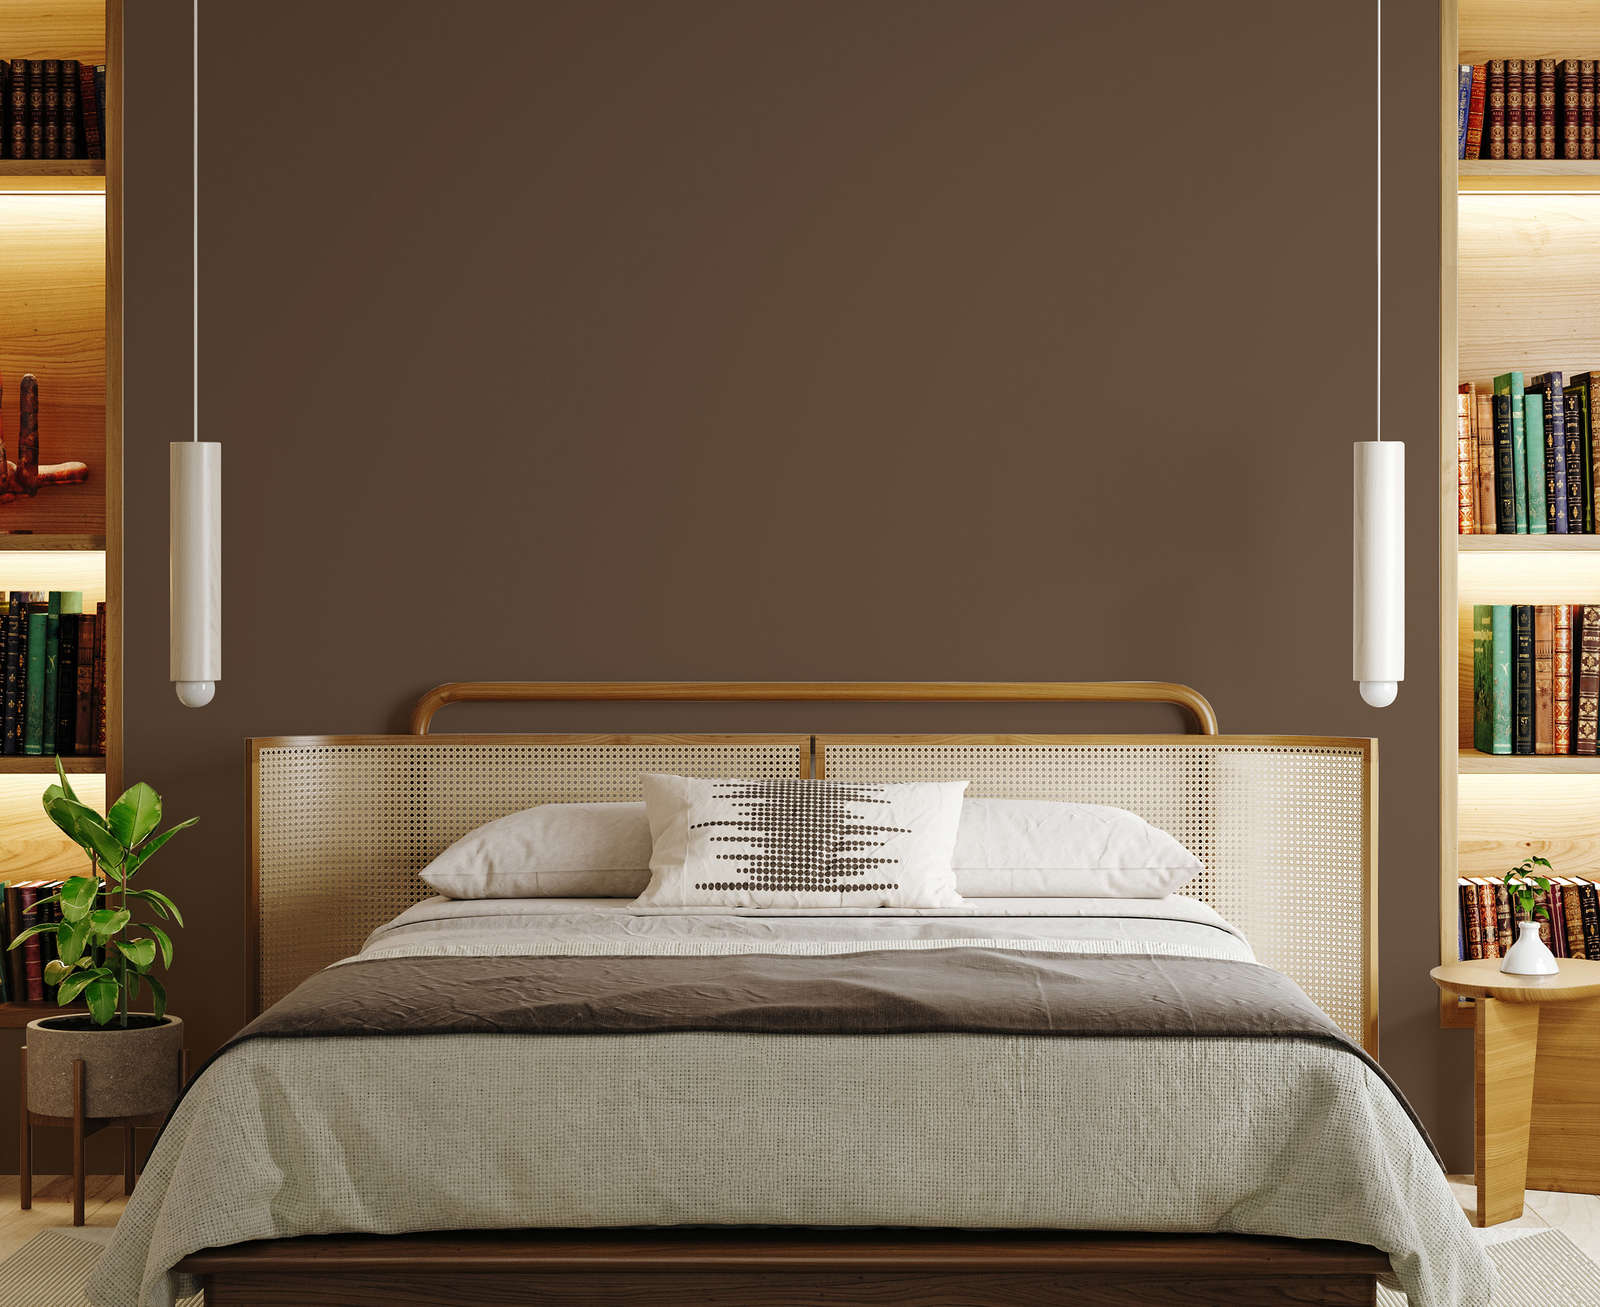             Premium Wall Paint Nature Nut Brown »Modern Mud« NW720 – 5 litre
        